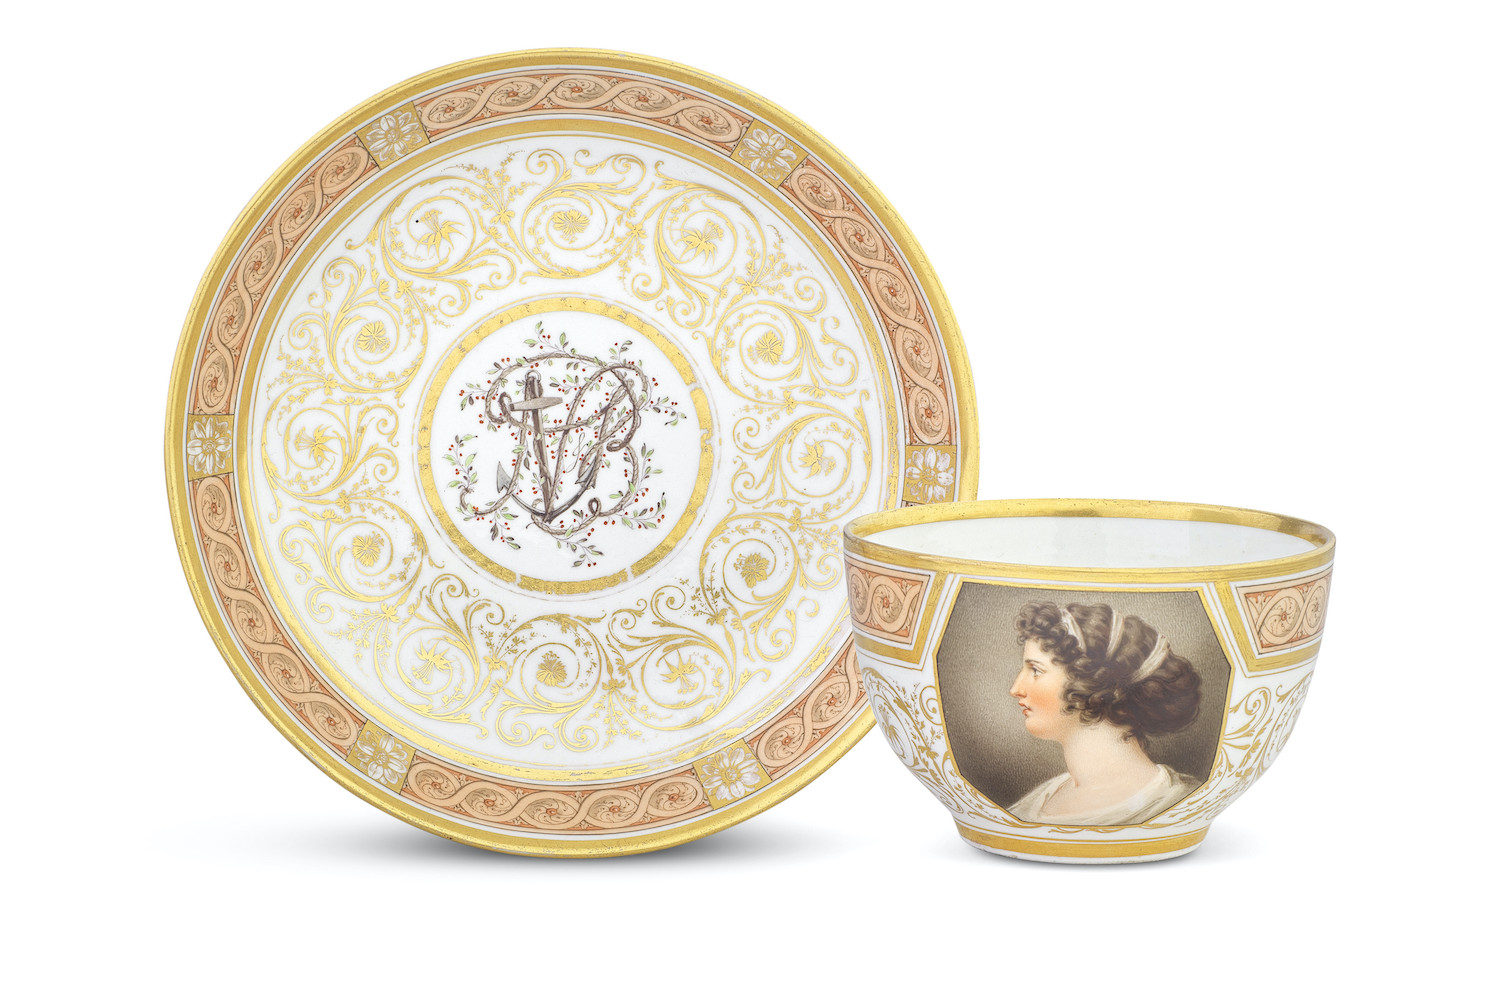 A Coalport cup and saucer by Thomas Baxter, dated 1804